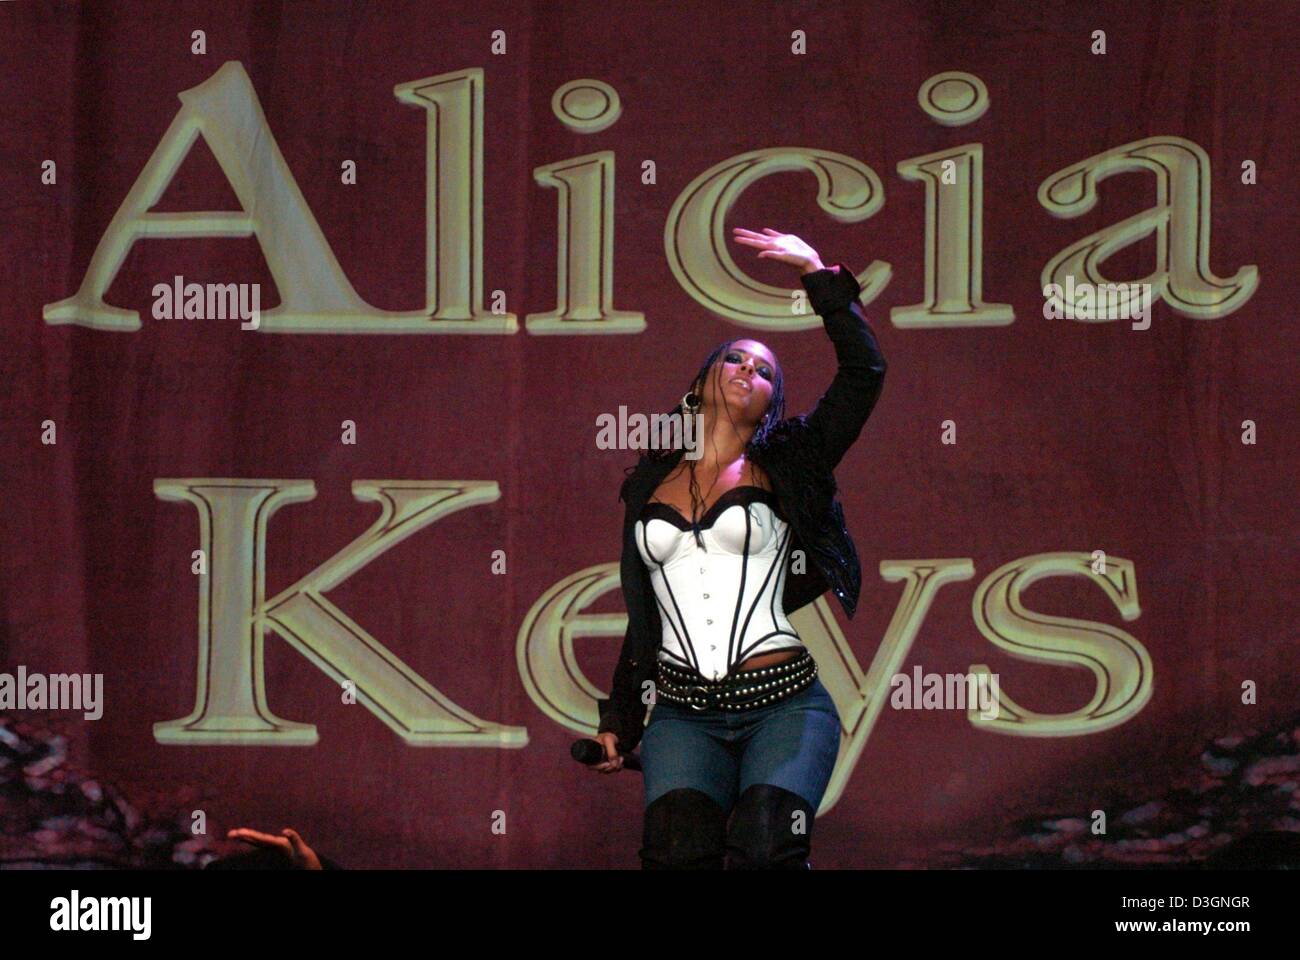 (dpa) - US singer Alicia Keys performs on stage at the Freilichtbuehne im Stadtpark in Hamburg, Germany, 15 June 2004. The 23-year-old R&B singer presented songs from her latest album 'The Diary of Alicia Keys' to 3,000 excited fans. Her European tour will lead her through Germany, Belgium, Italy, Switzerland, France, Spain, Norway, the Netherlands, Denmark, the UK and Ireland. Stock Photo